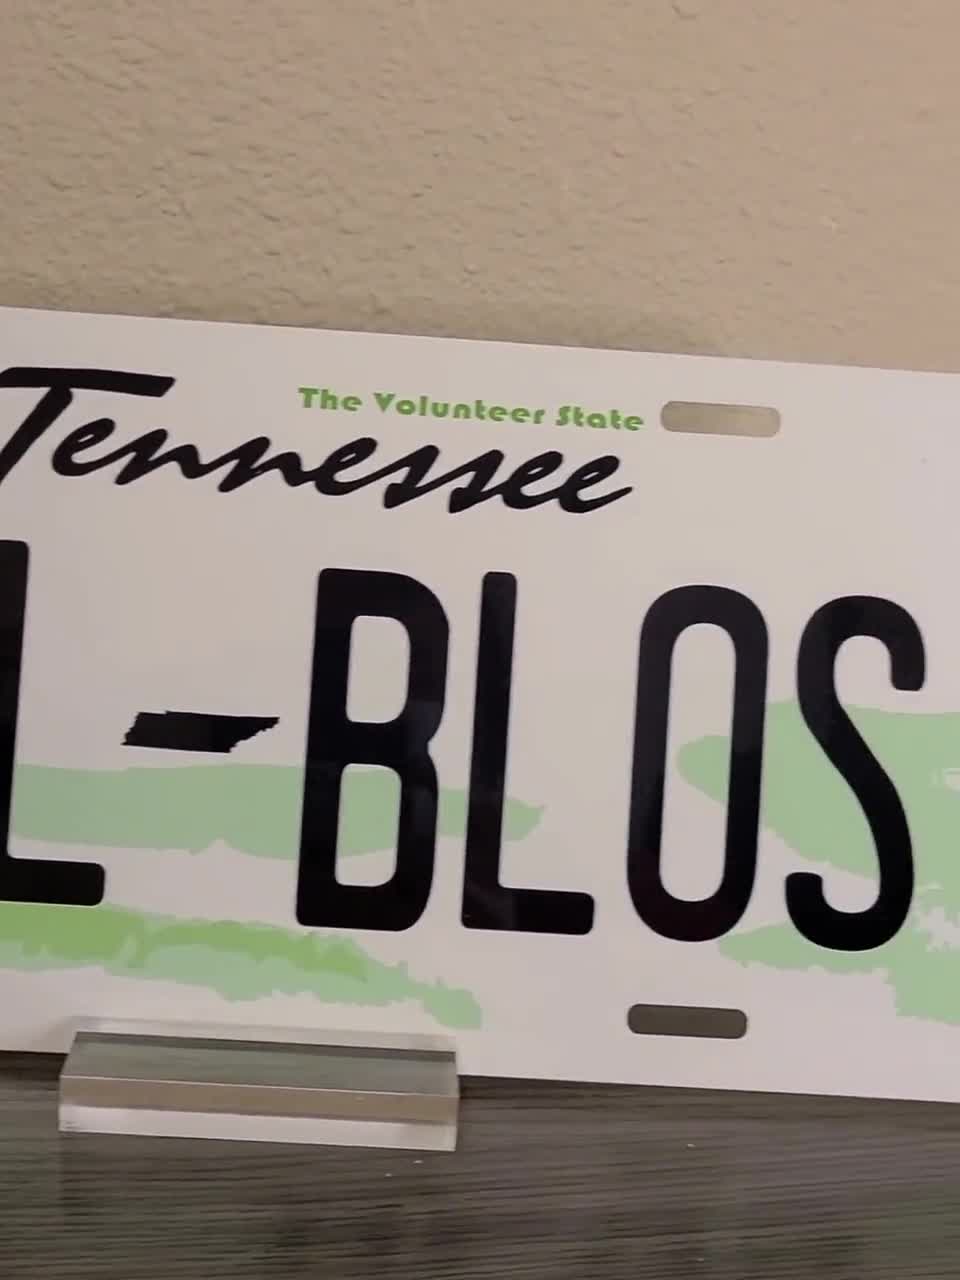 Placa Personalizada de TENNESSEE / Any text-Cualquier texto / Car Plate  TENNESSEE / License Plate Tennessee / Tennessee State -  México